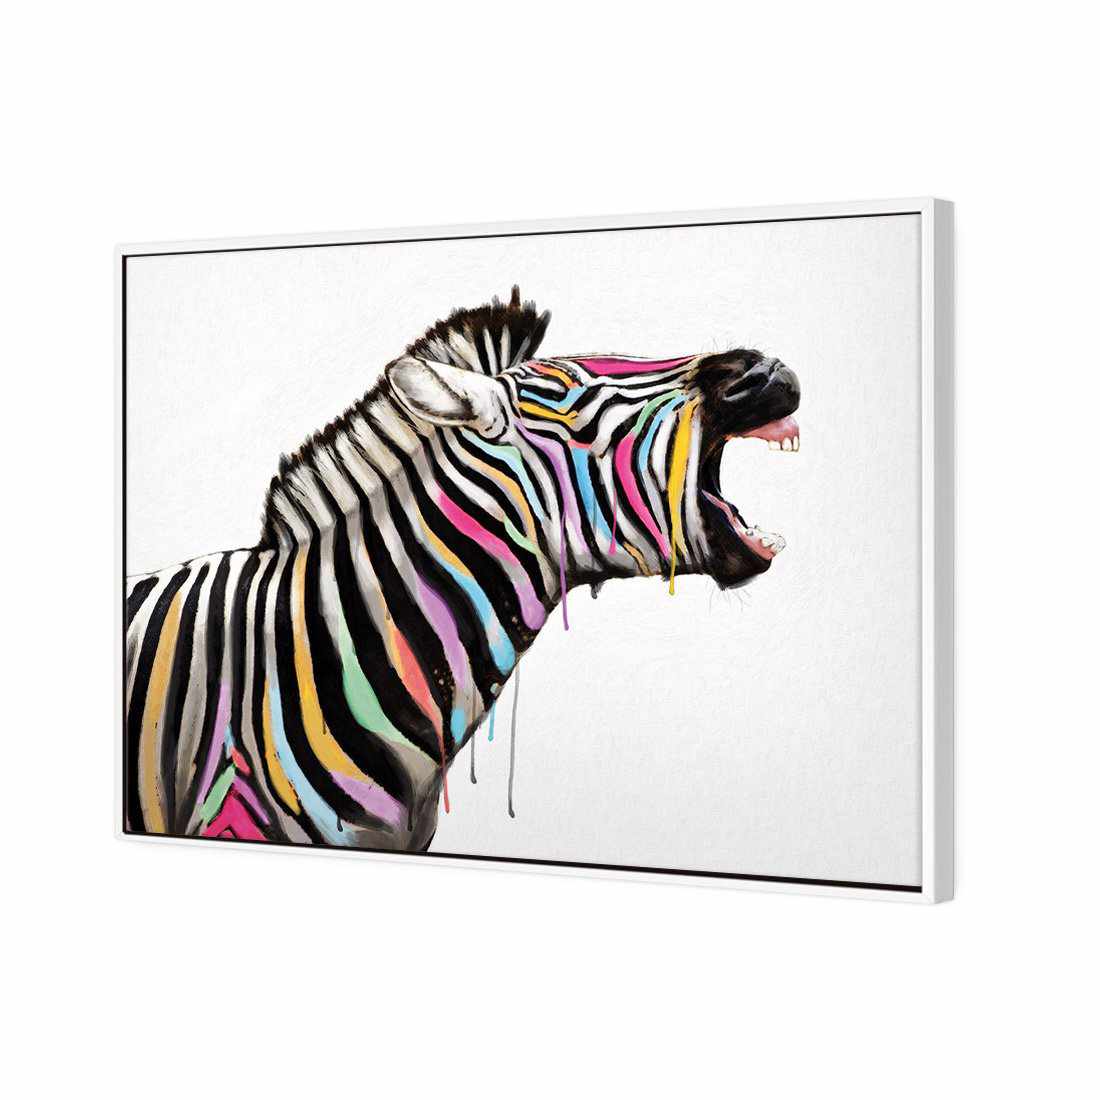 Laughing Stock Canvas Art-Canvas-Wall Art Designs-45x30cm-Canvas - White Frame-Wall Art Designs